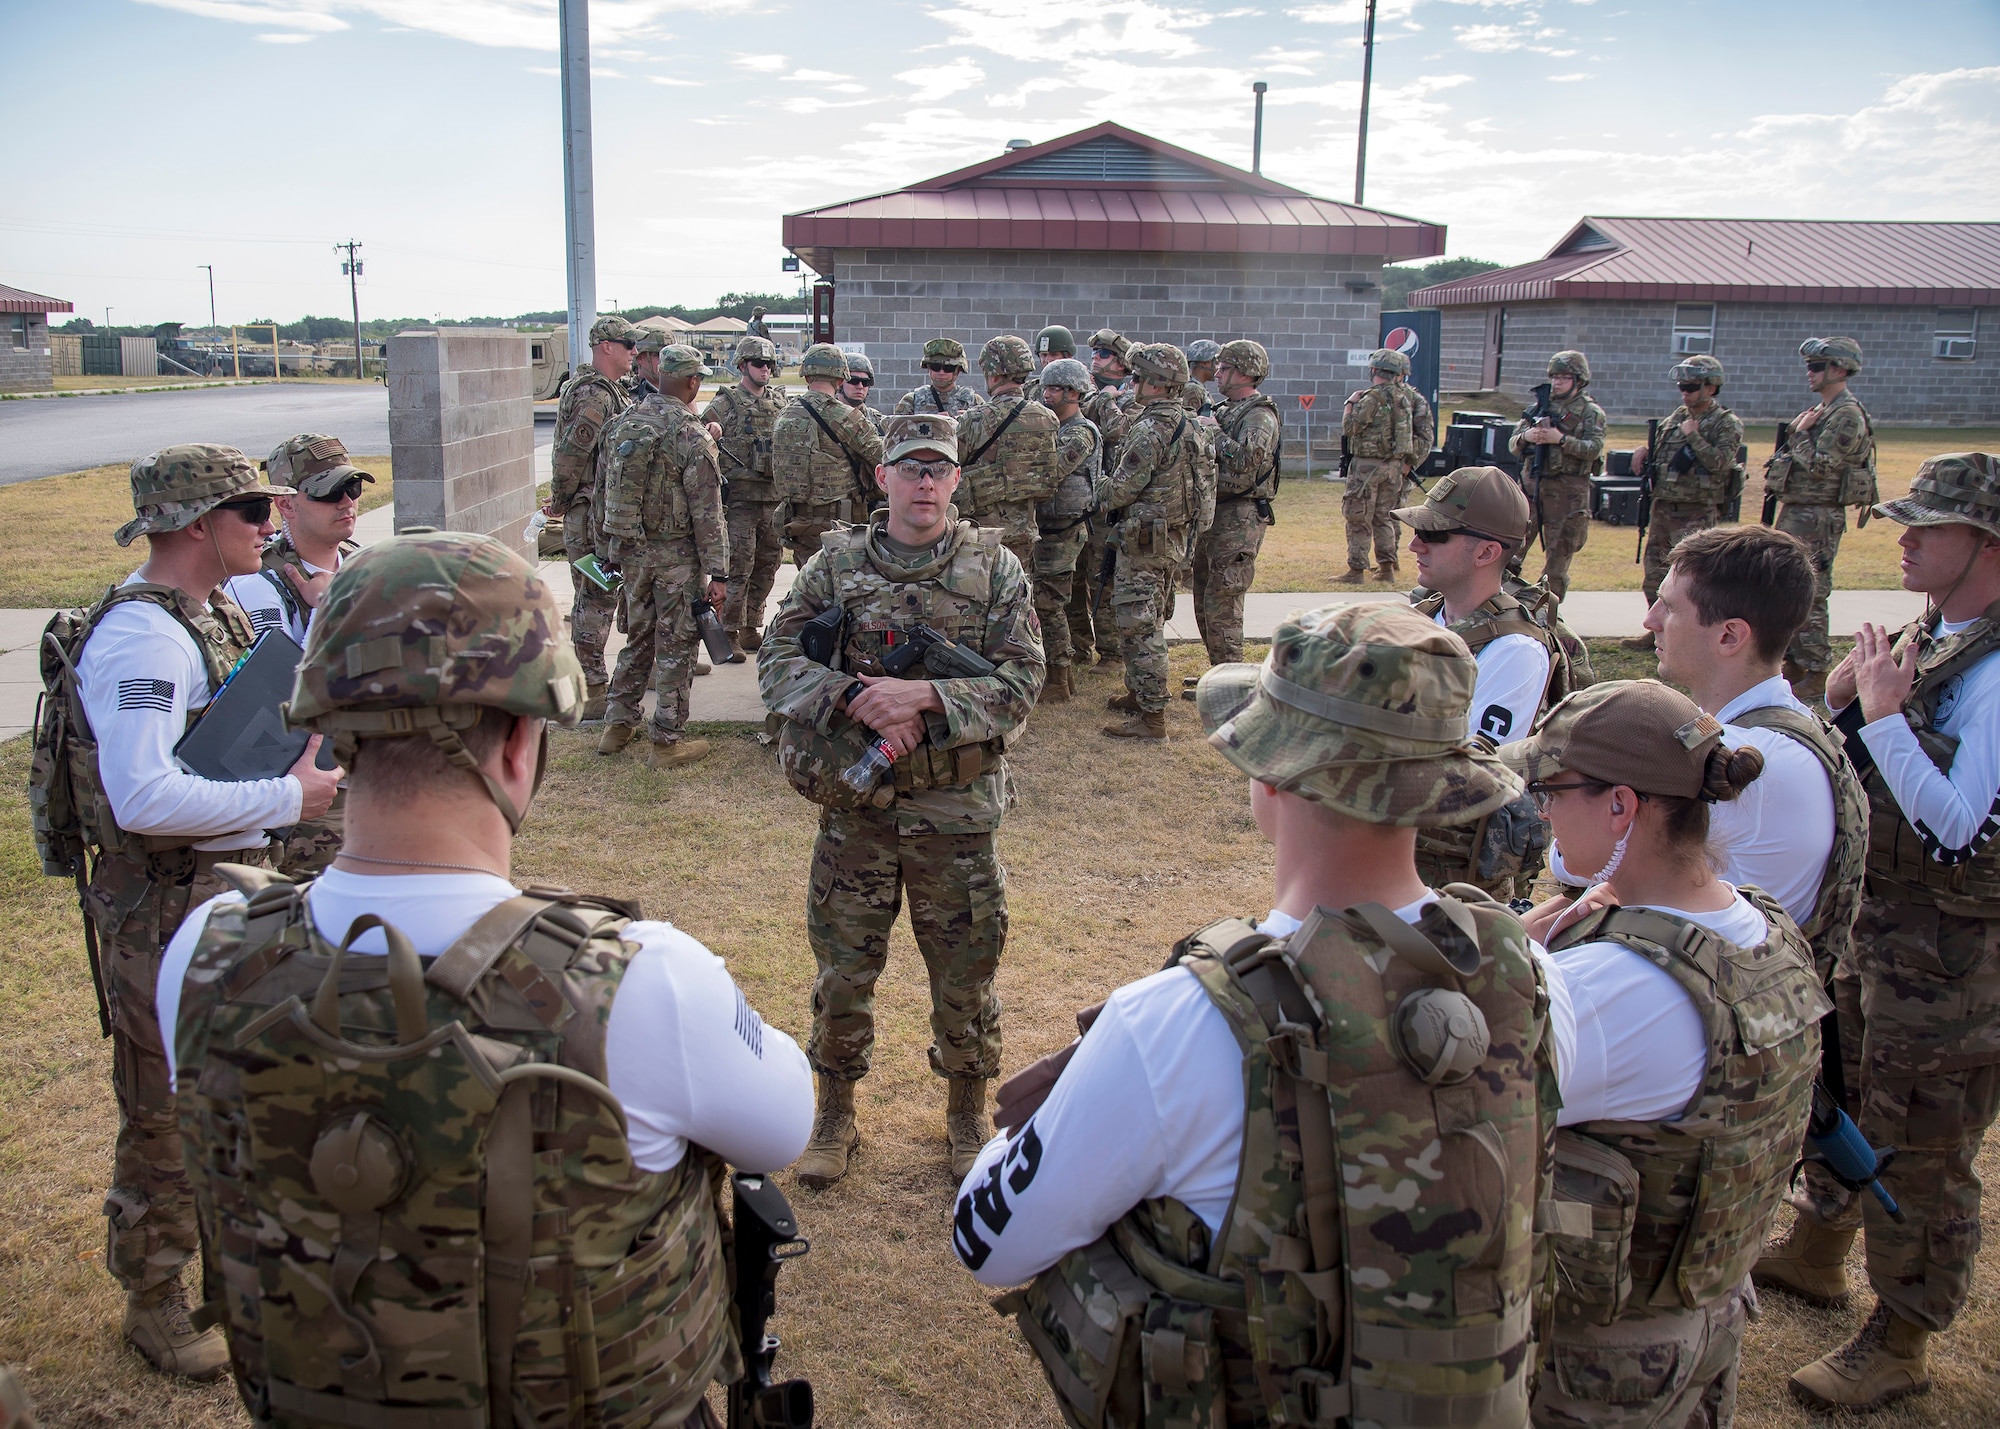 Lt. Col. Robert Nelson, center, 3d Weather Squadron commander, briefs evaluators during a certification field exercise (CFX), July 29, 2019, at Camp Bowie Training Center, Texas. The CFX was designed to evaluate the squadron’s overall tactical ability and readiness to provide the U.S. Army with full spectrum environmental support to the Joint Task Force (JTF) fight. While deployed, the Army relies on the 3d WS to provide them with current ground weather reports. These reports are then employed by commanders on the ground as they plan the best tactics and approaches to accomplish the mission. (U.S. Air Force photo by Airman 1st Class Eugene Oliver)